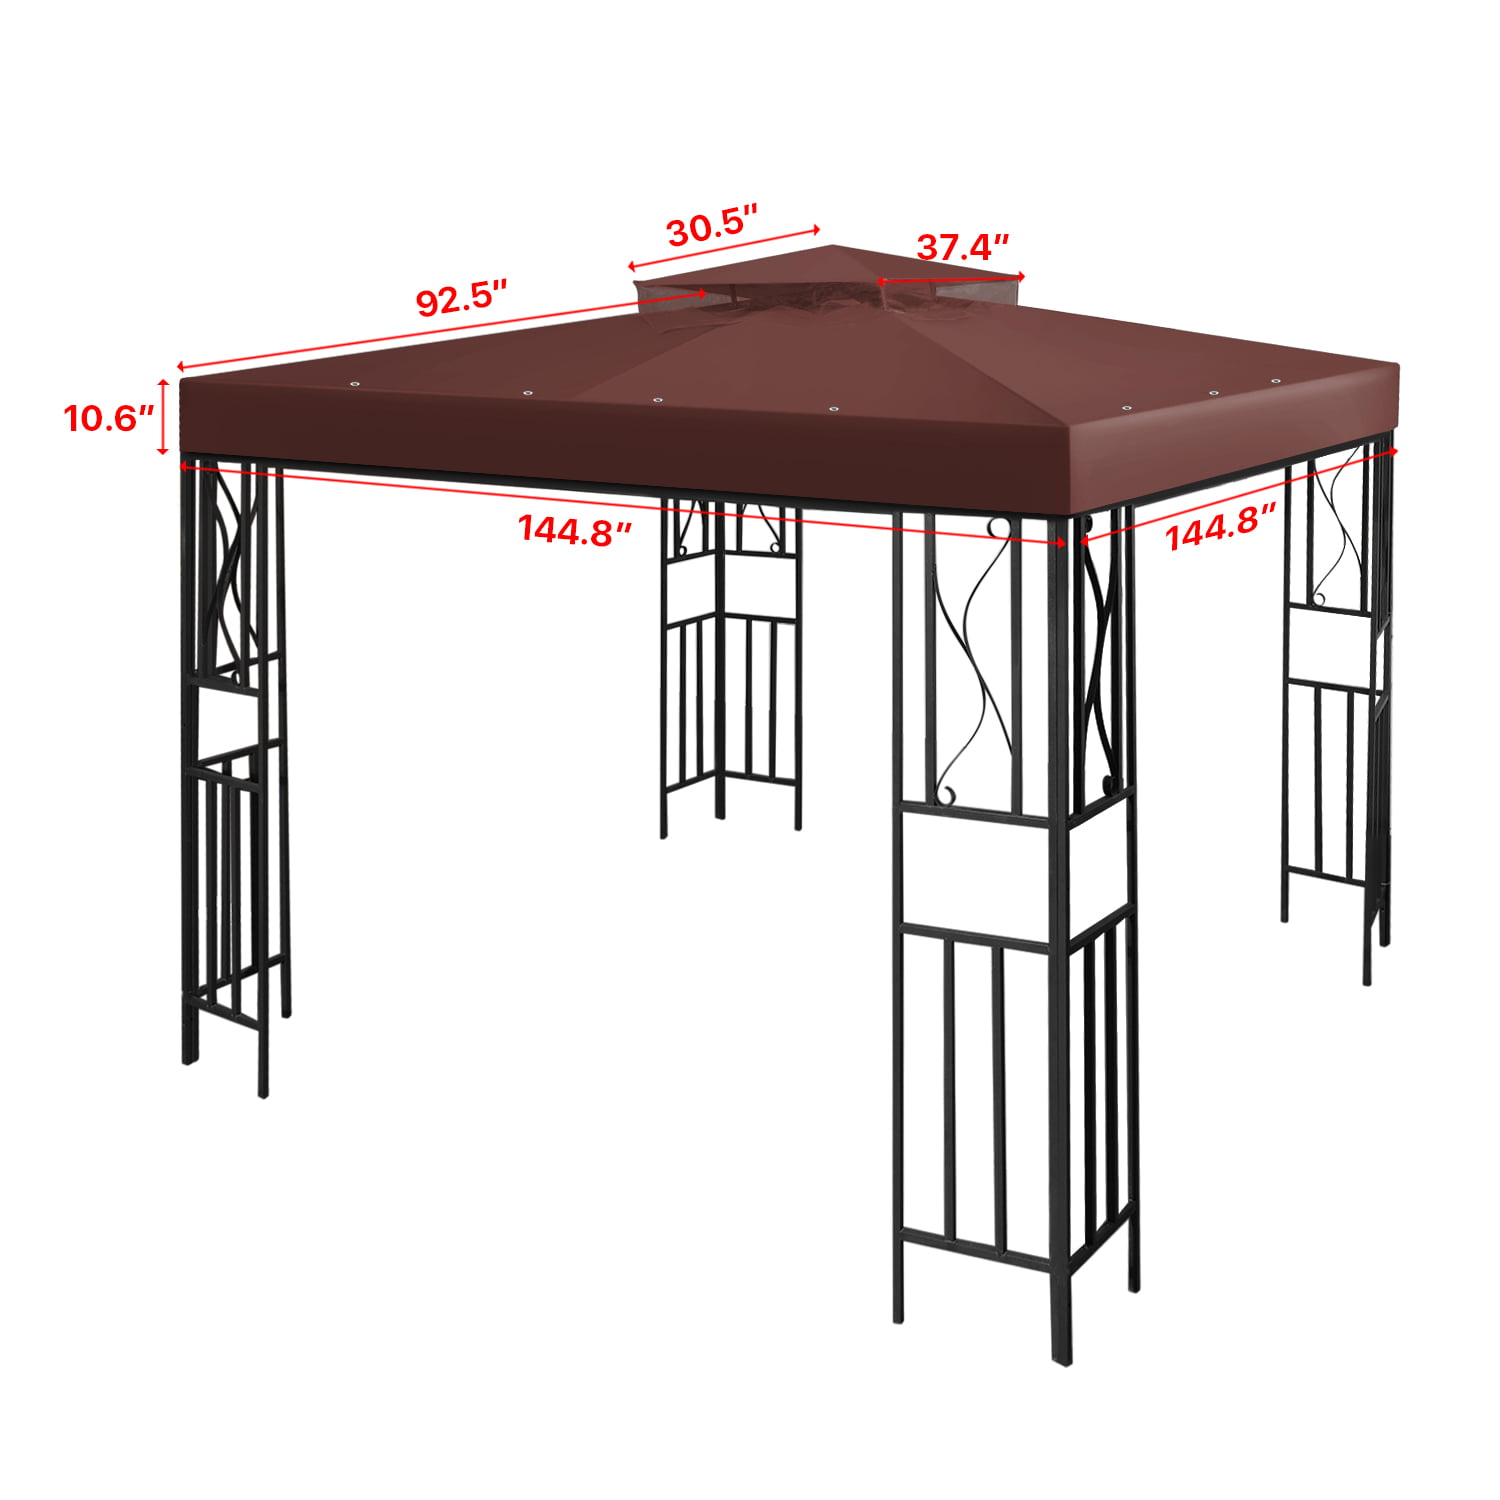 12 X 12 Gazebo Canopy Top Replacement Cover Brown Dual Tier Up